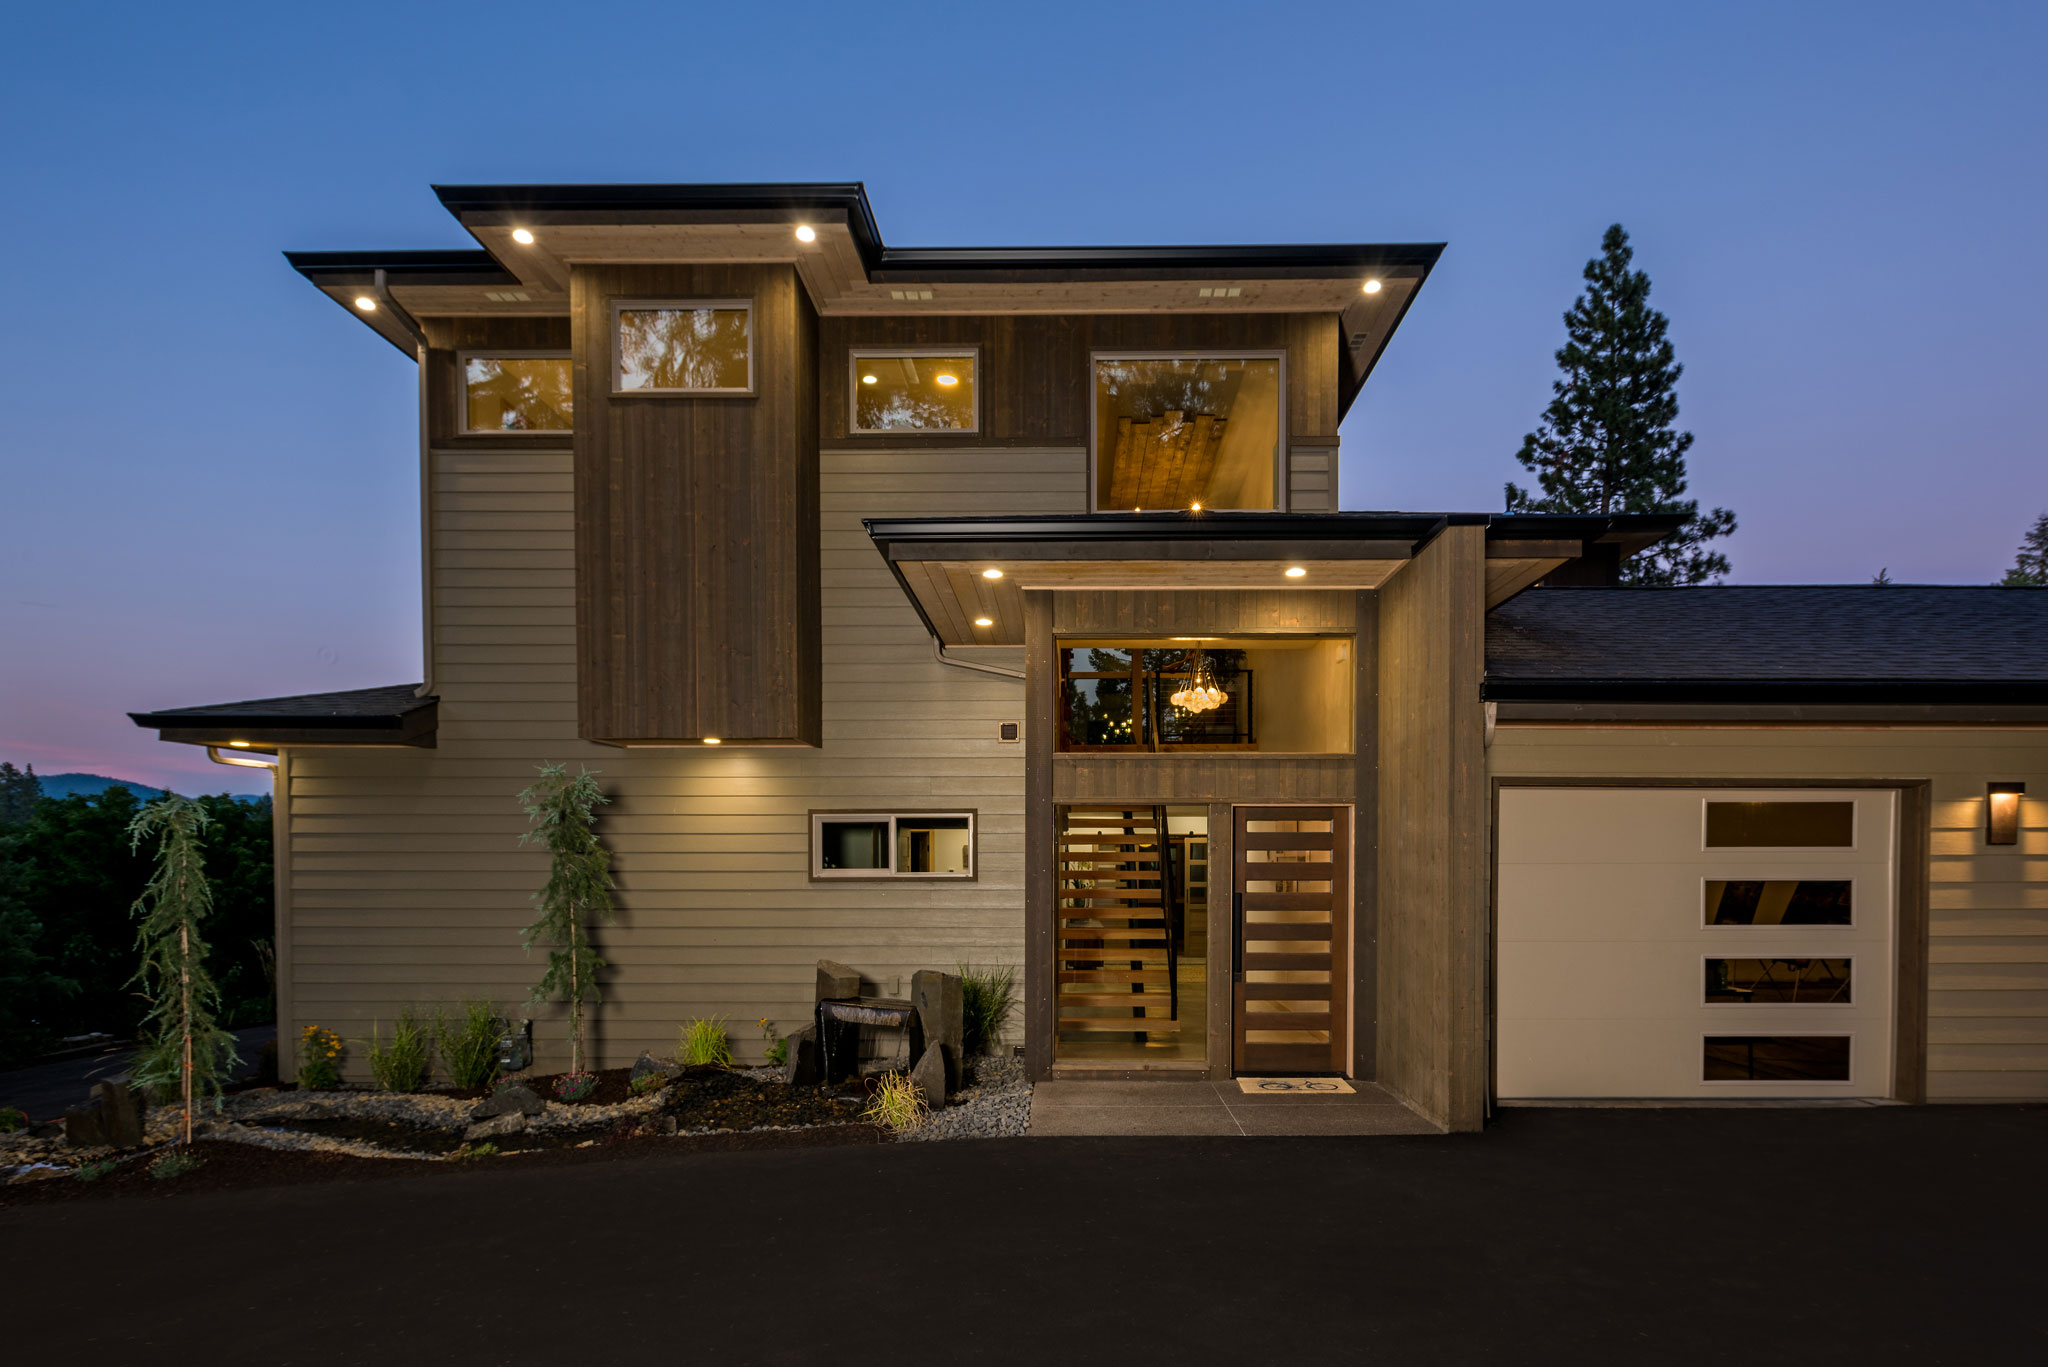 Elevated Living - Pacific Northwest Living